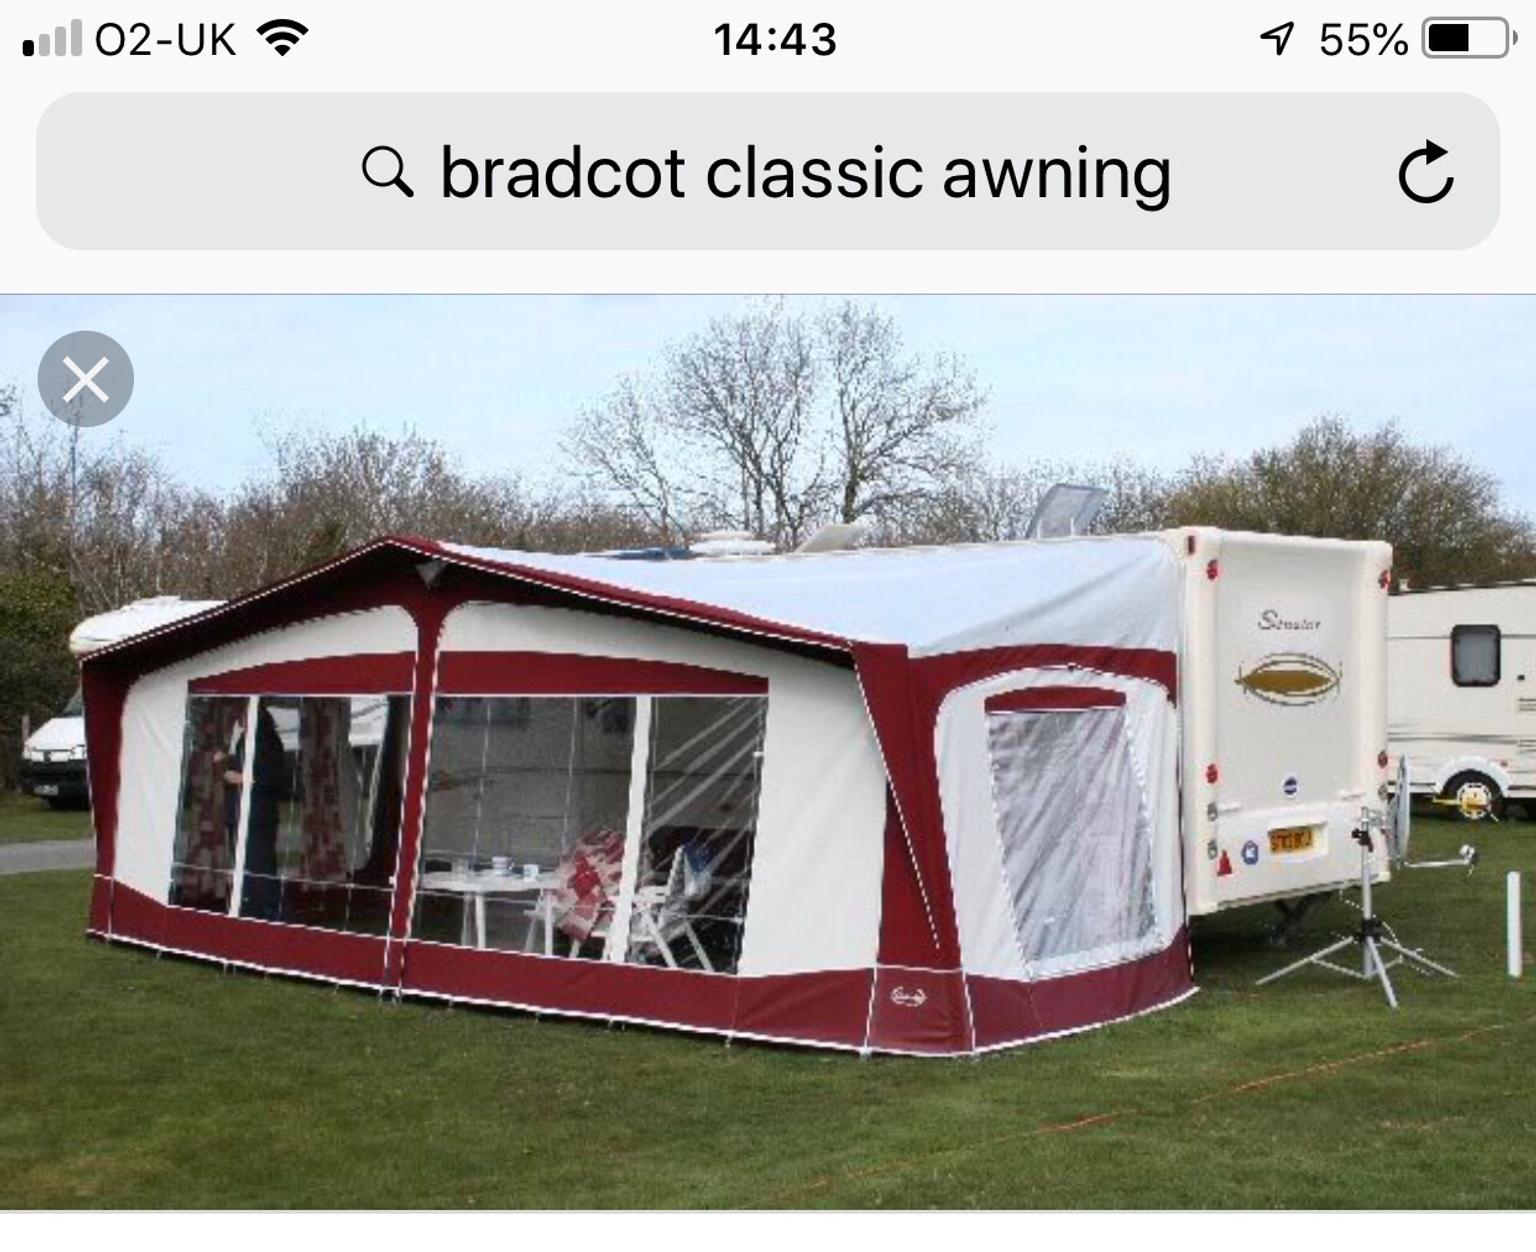 Bradcot Classic Awning In Wf3 Leeds For 100 00 For Sale Shpock